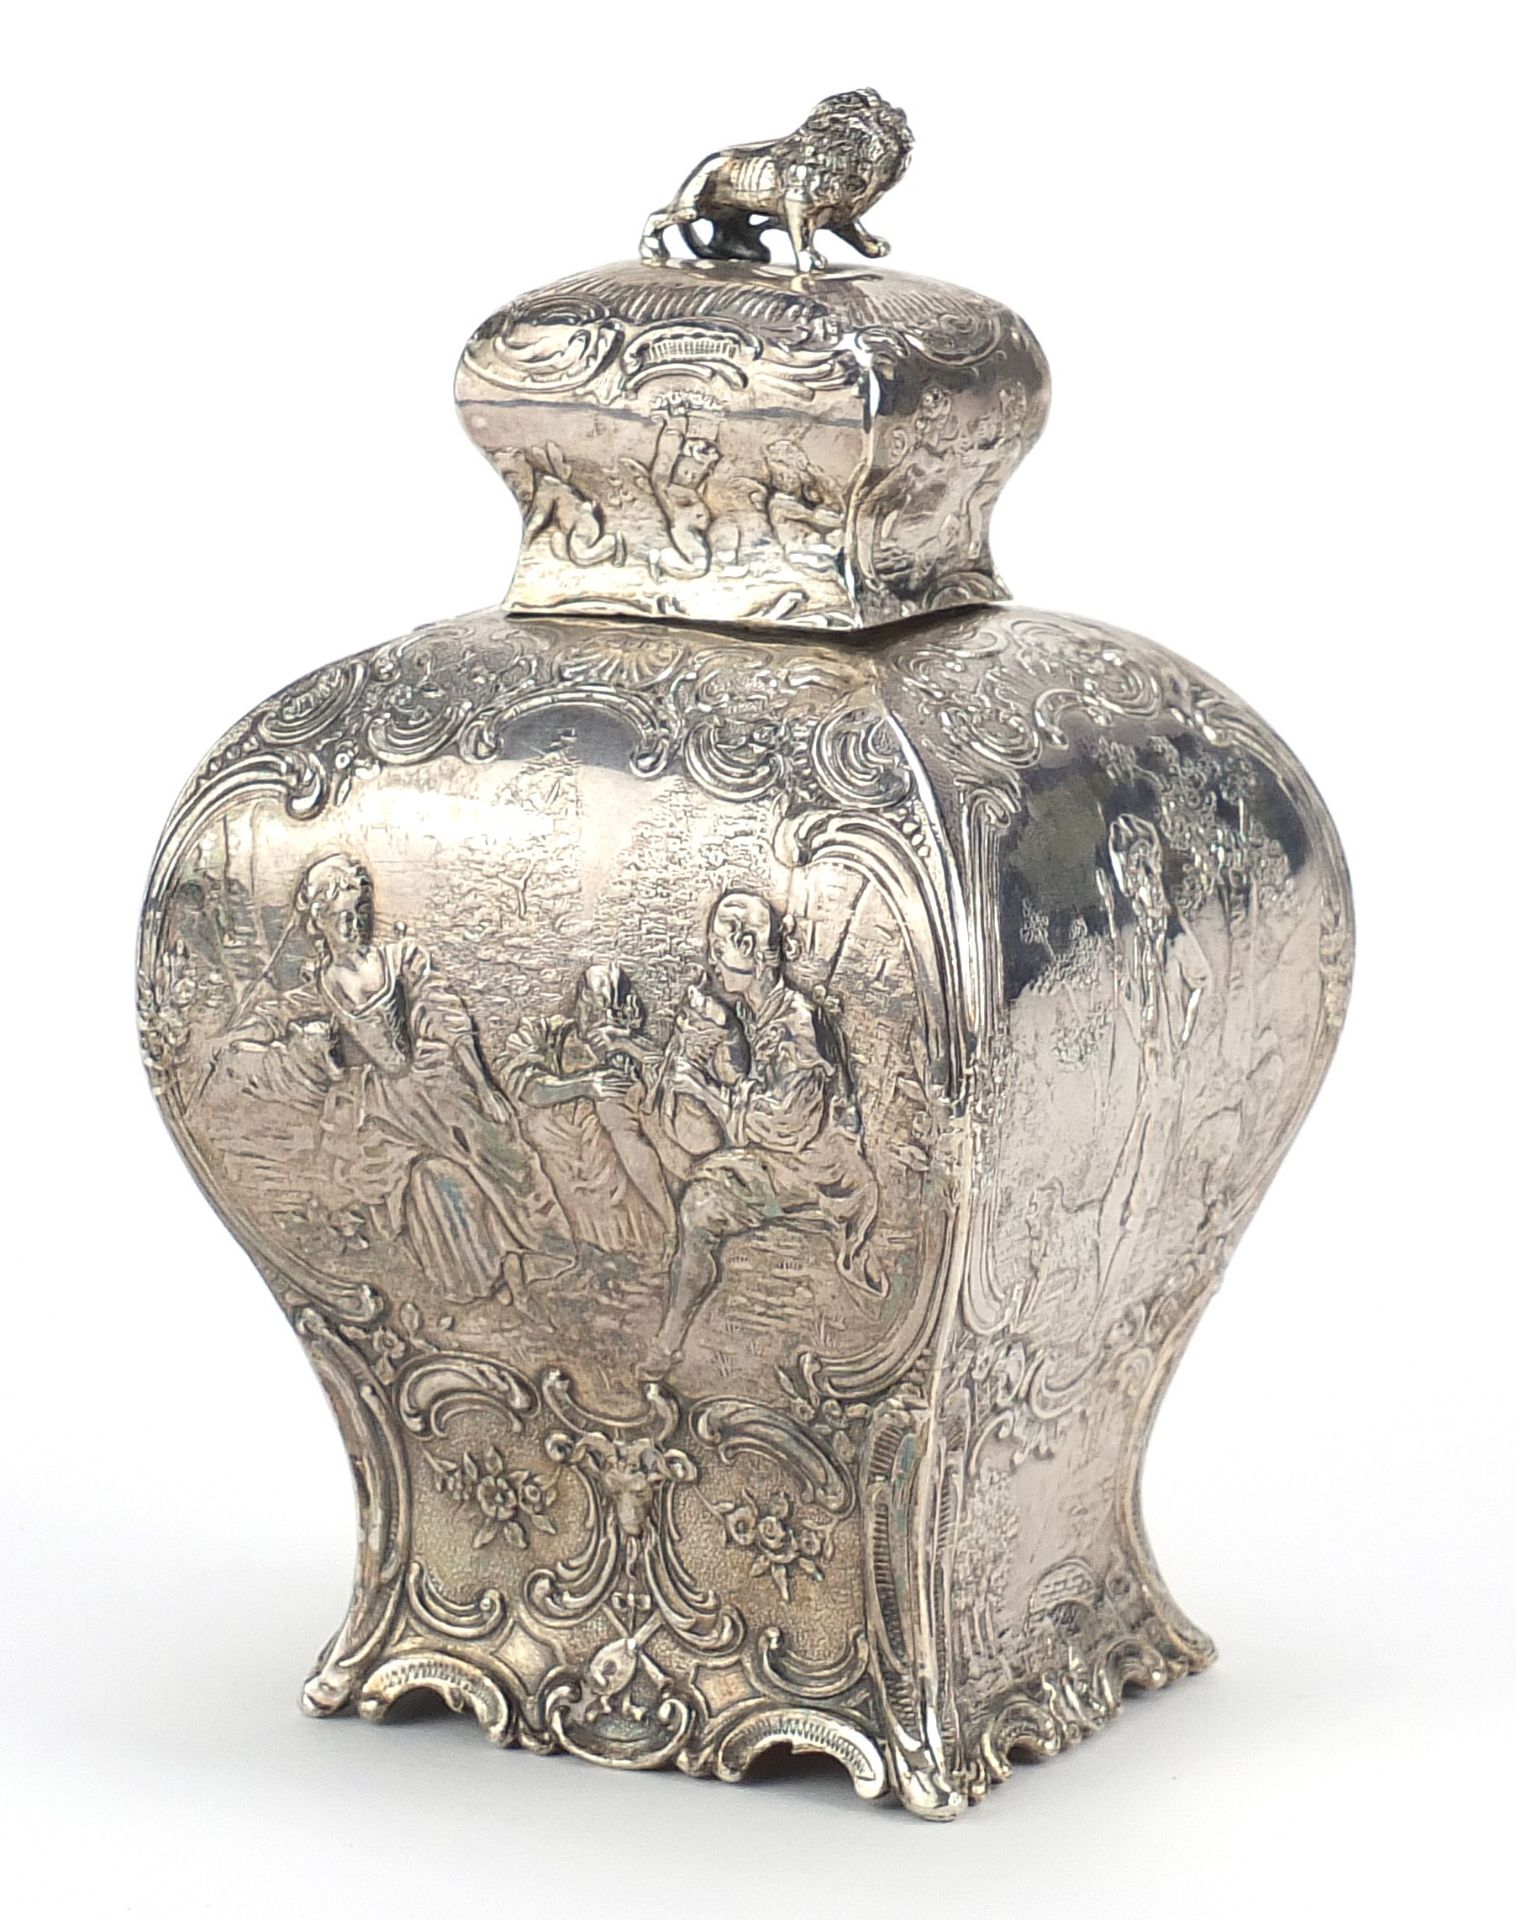 Antique Dutch silver caddy embossed with figures playing musical instruments, shepherd and Putti, - Image 2 of 4